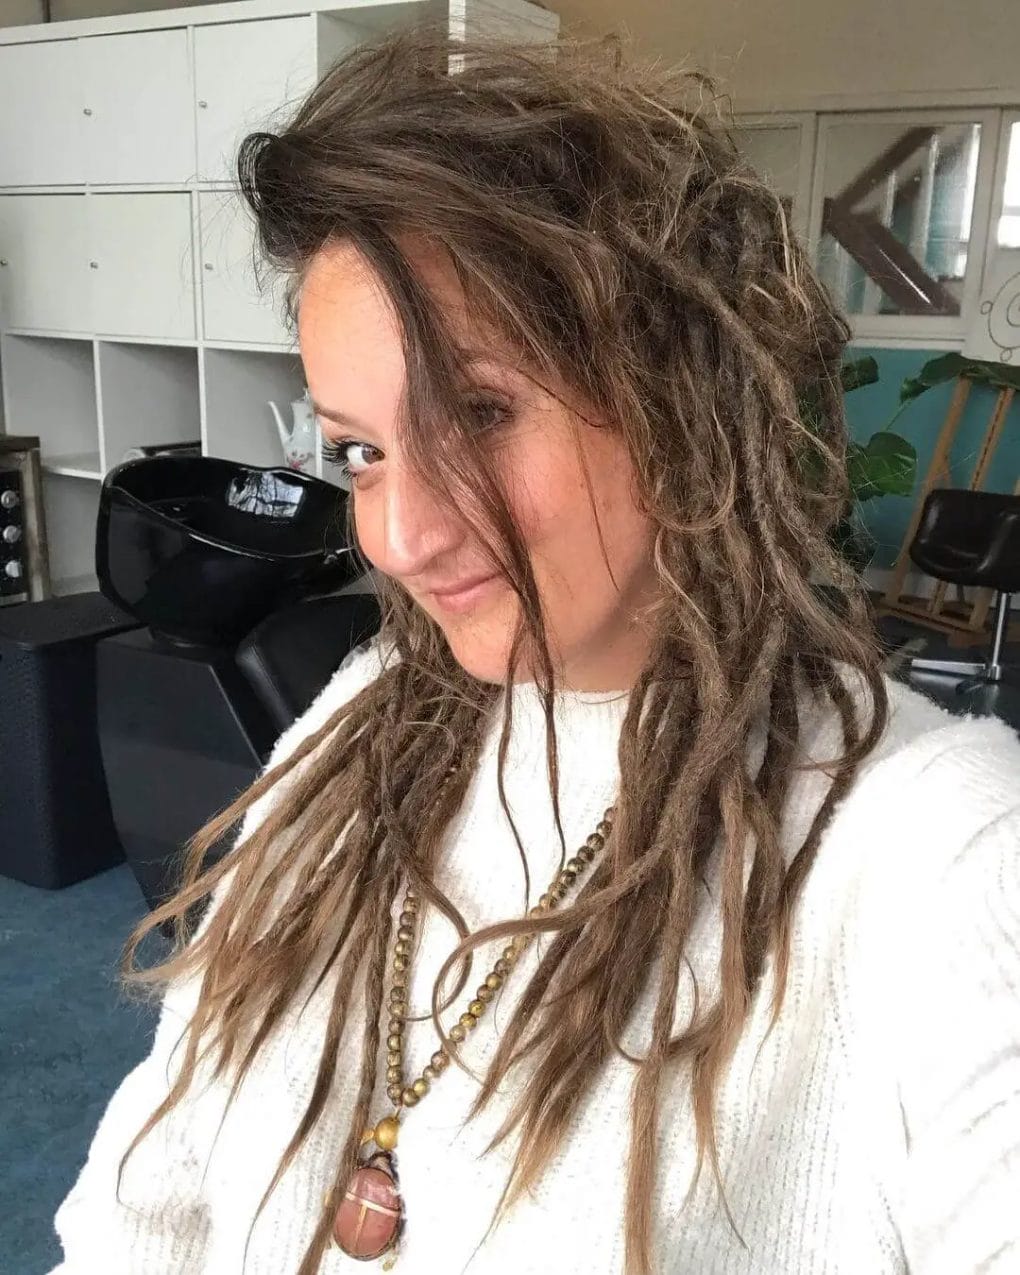 Brunette hairstyle transitioning from a smooth texture at the crown to dreadlocks towards the ends.